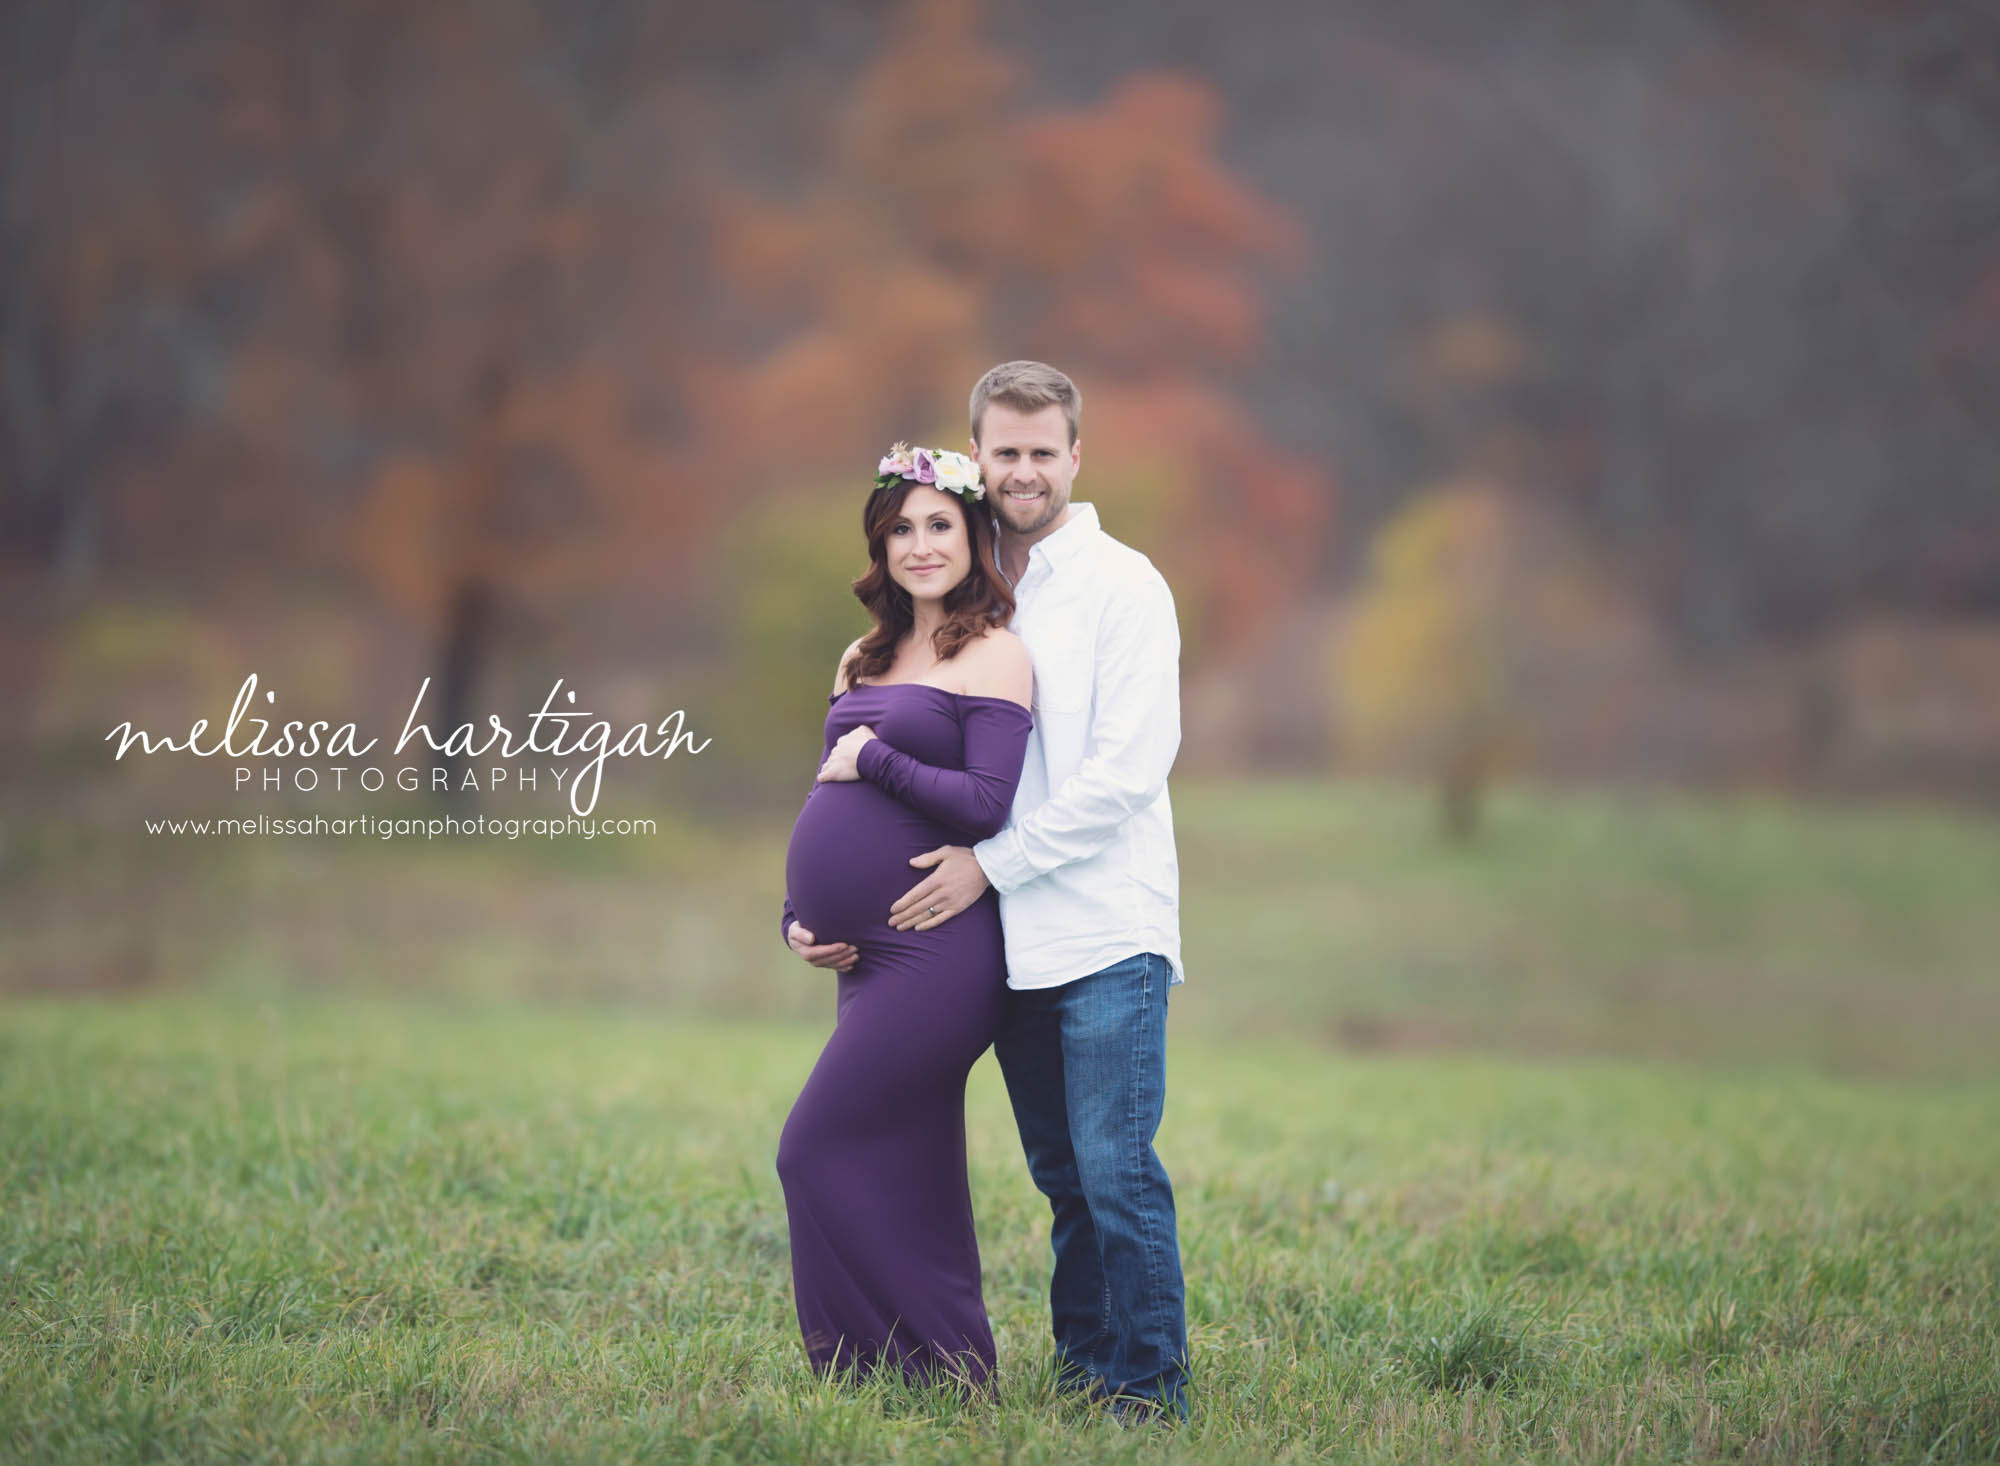 Melissa Hartigan Photography Coventry CT Newborn & Maternity Photographer Coventry CT Maternity Newborn Session Carrie wearing purple maternity gown and floral crown standing in field holding baby bump with husband